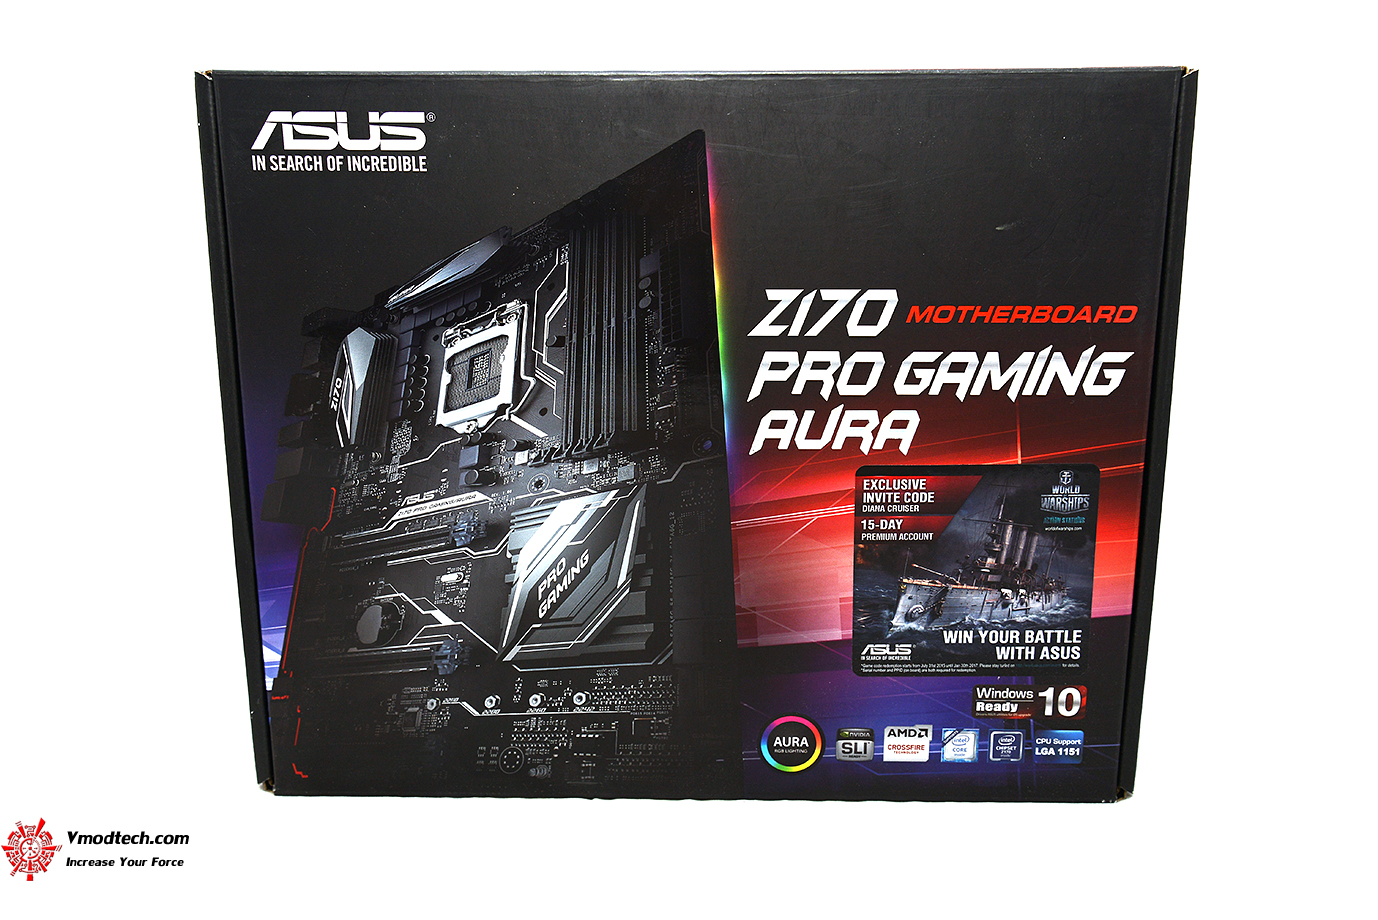 dsc 3893 ASUS Z170 PRO GAMING/AURA REVIEW